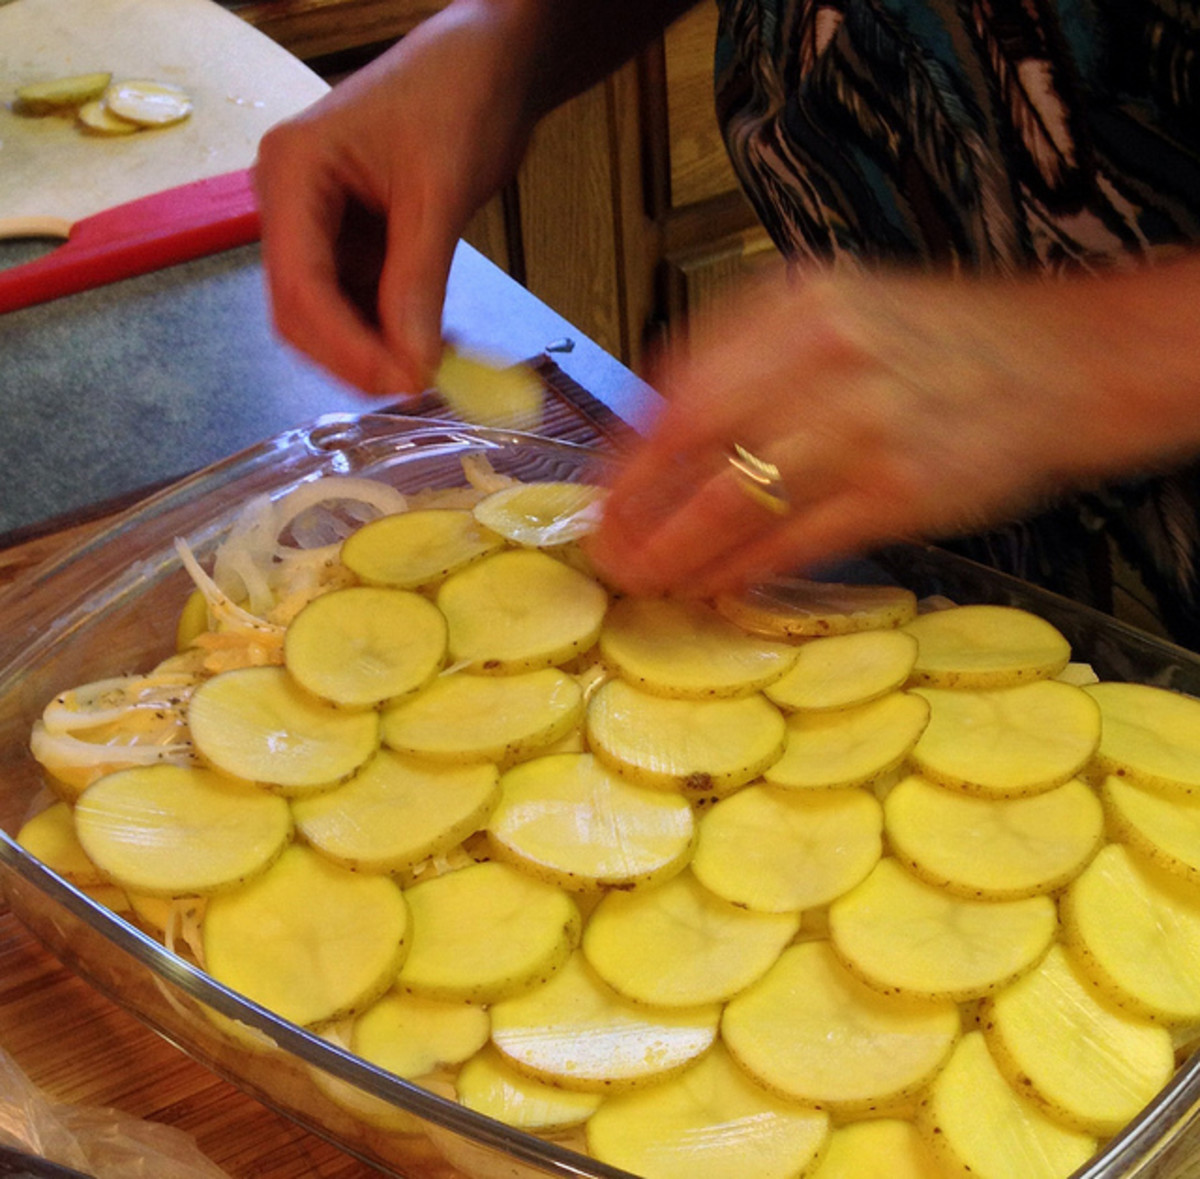 Layer the sliced potatoes in the baking dish